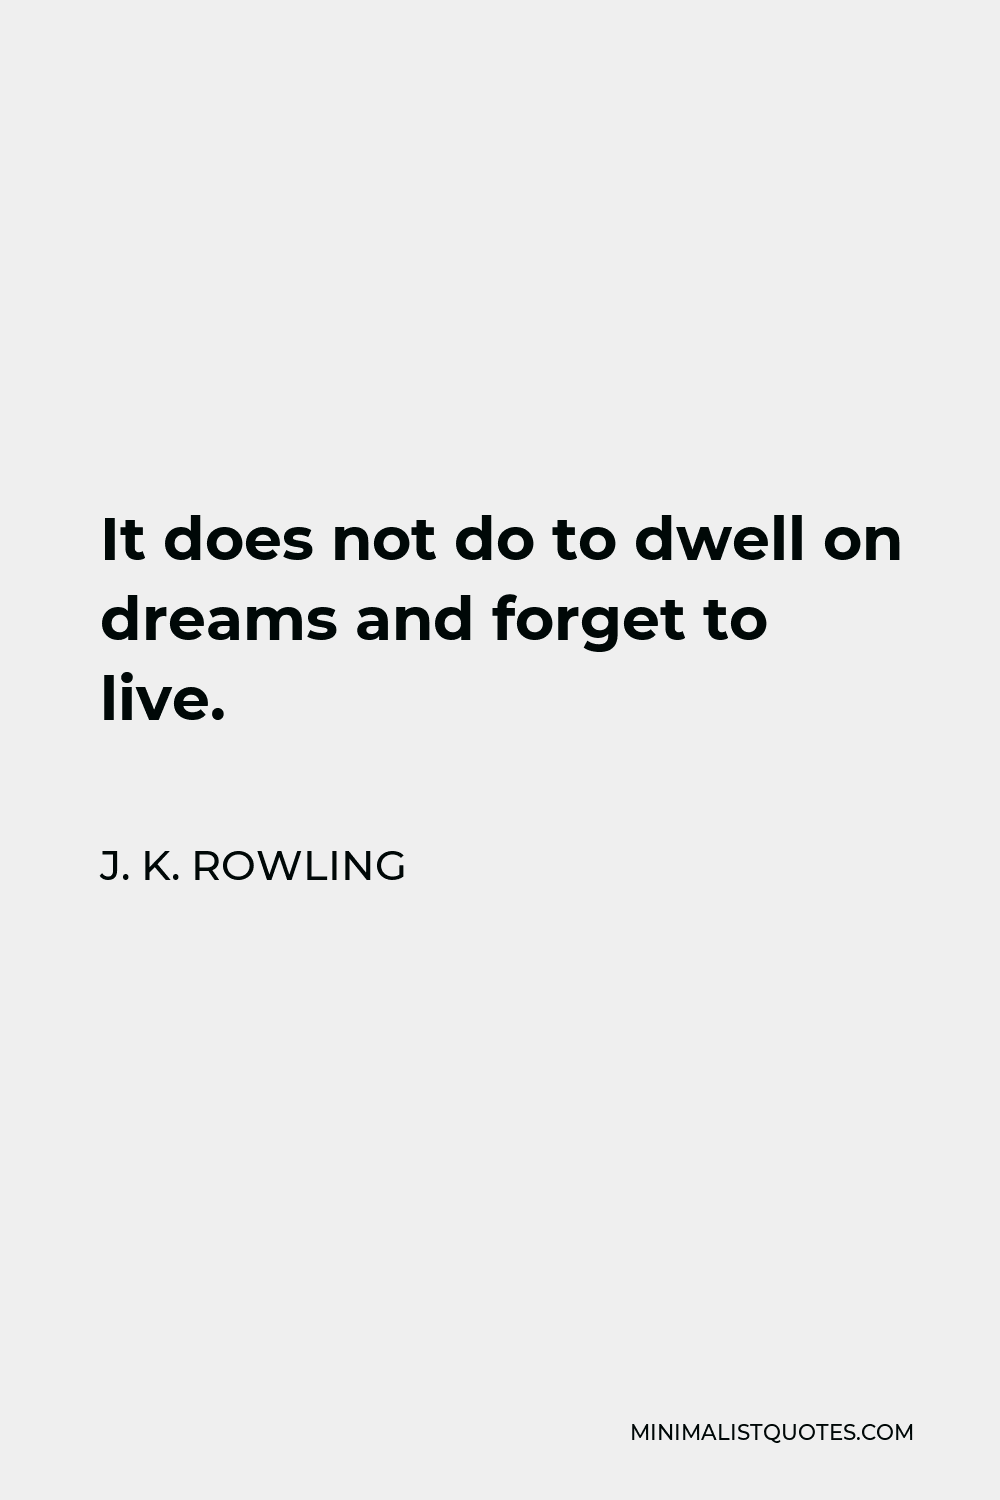 J. K. Rowling Quote - It does not do to dwell on dreams and forget to live.